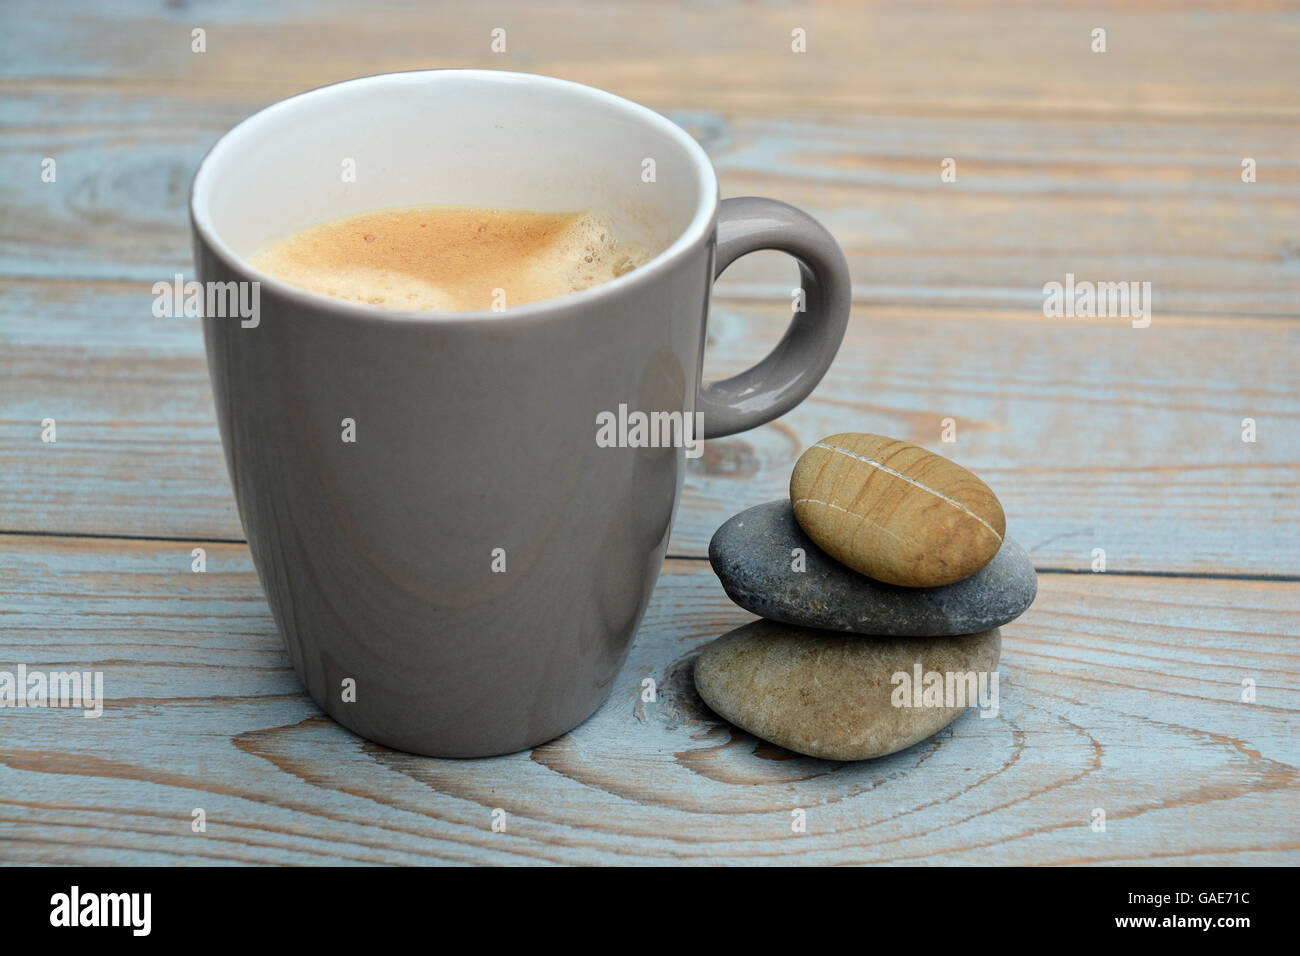 Cup of coffee in a mug on a old wooden background with three zen cairn stones Stock Photo